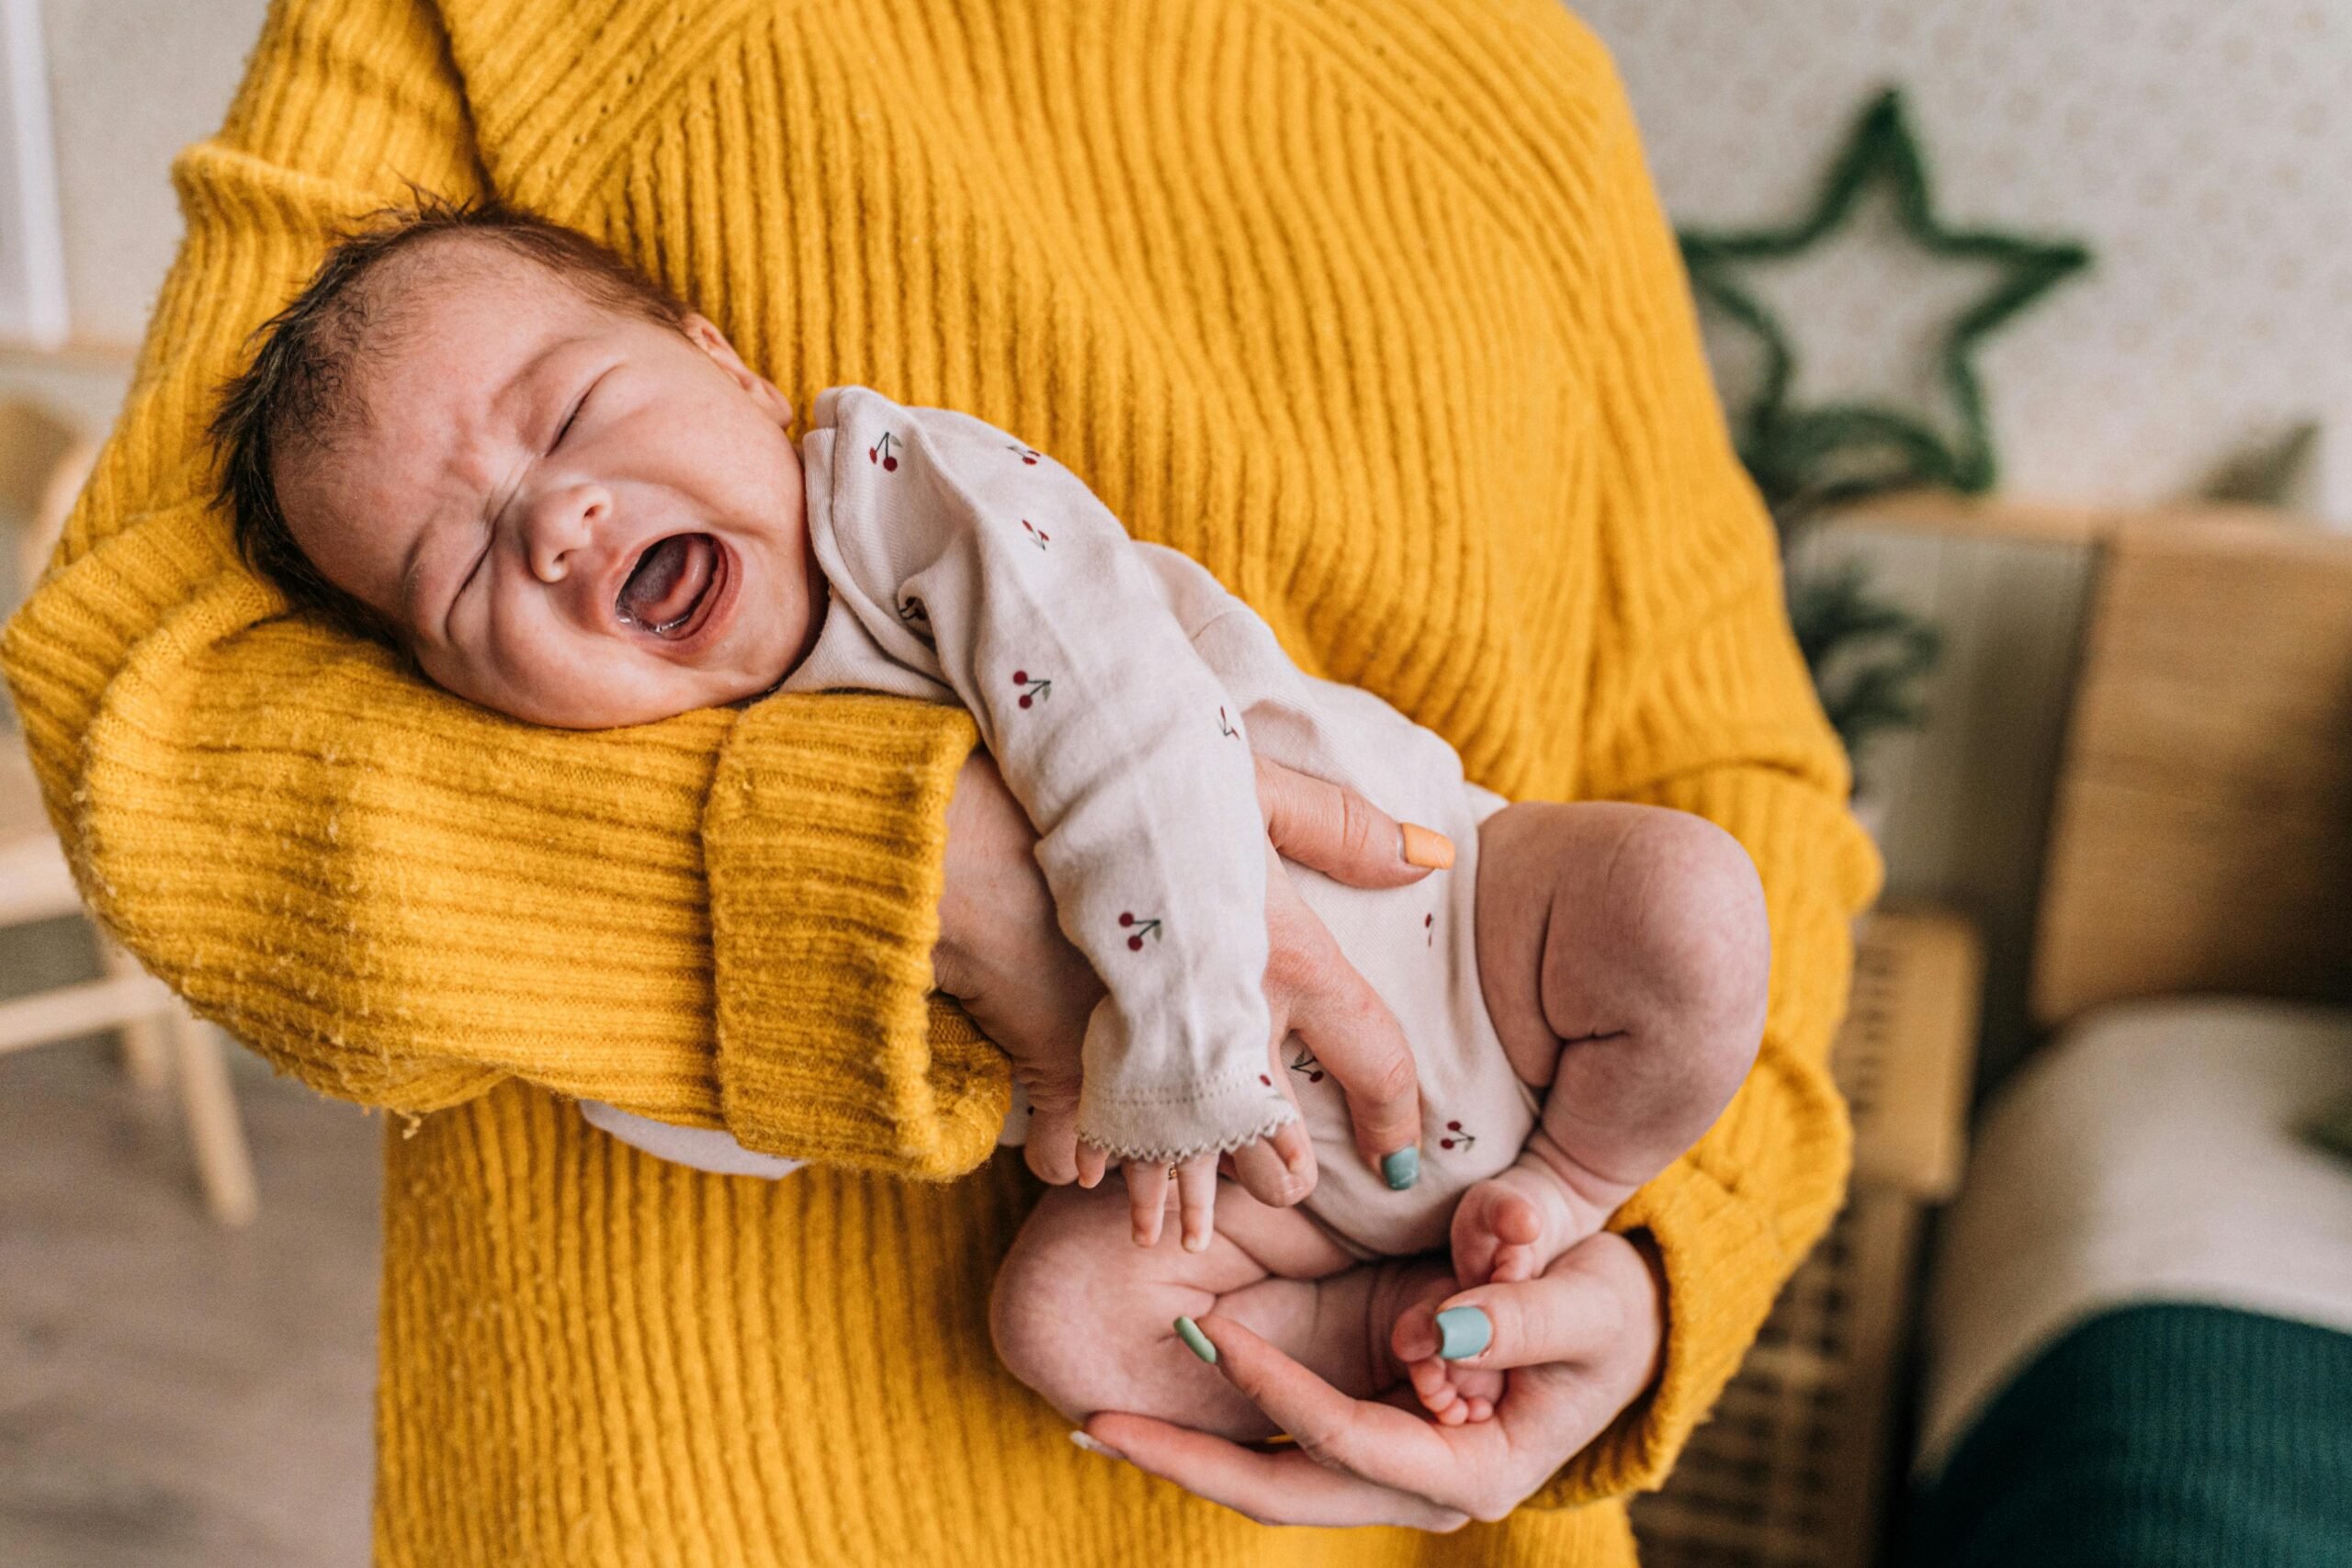 Why Is My Baby So Fussy? Blog | The Peaceful Sleeper